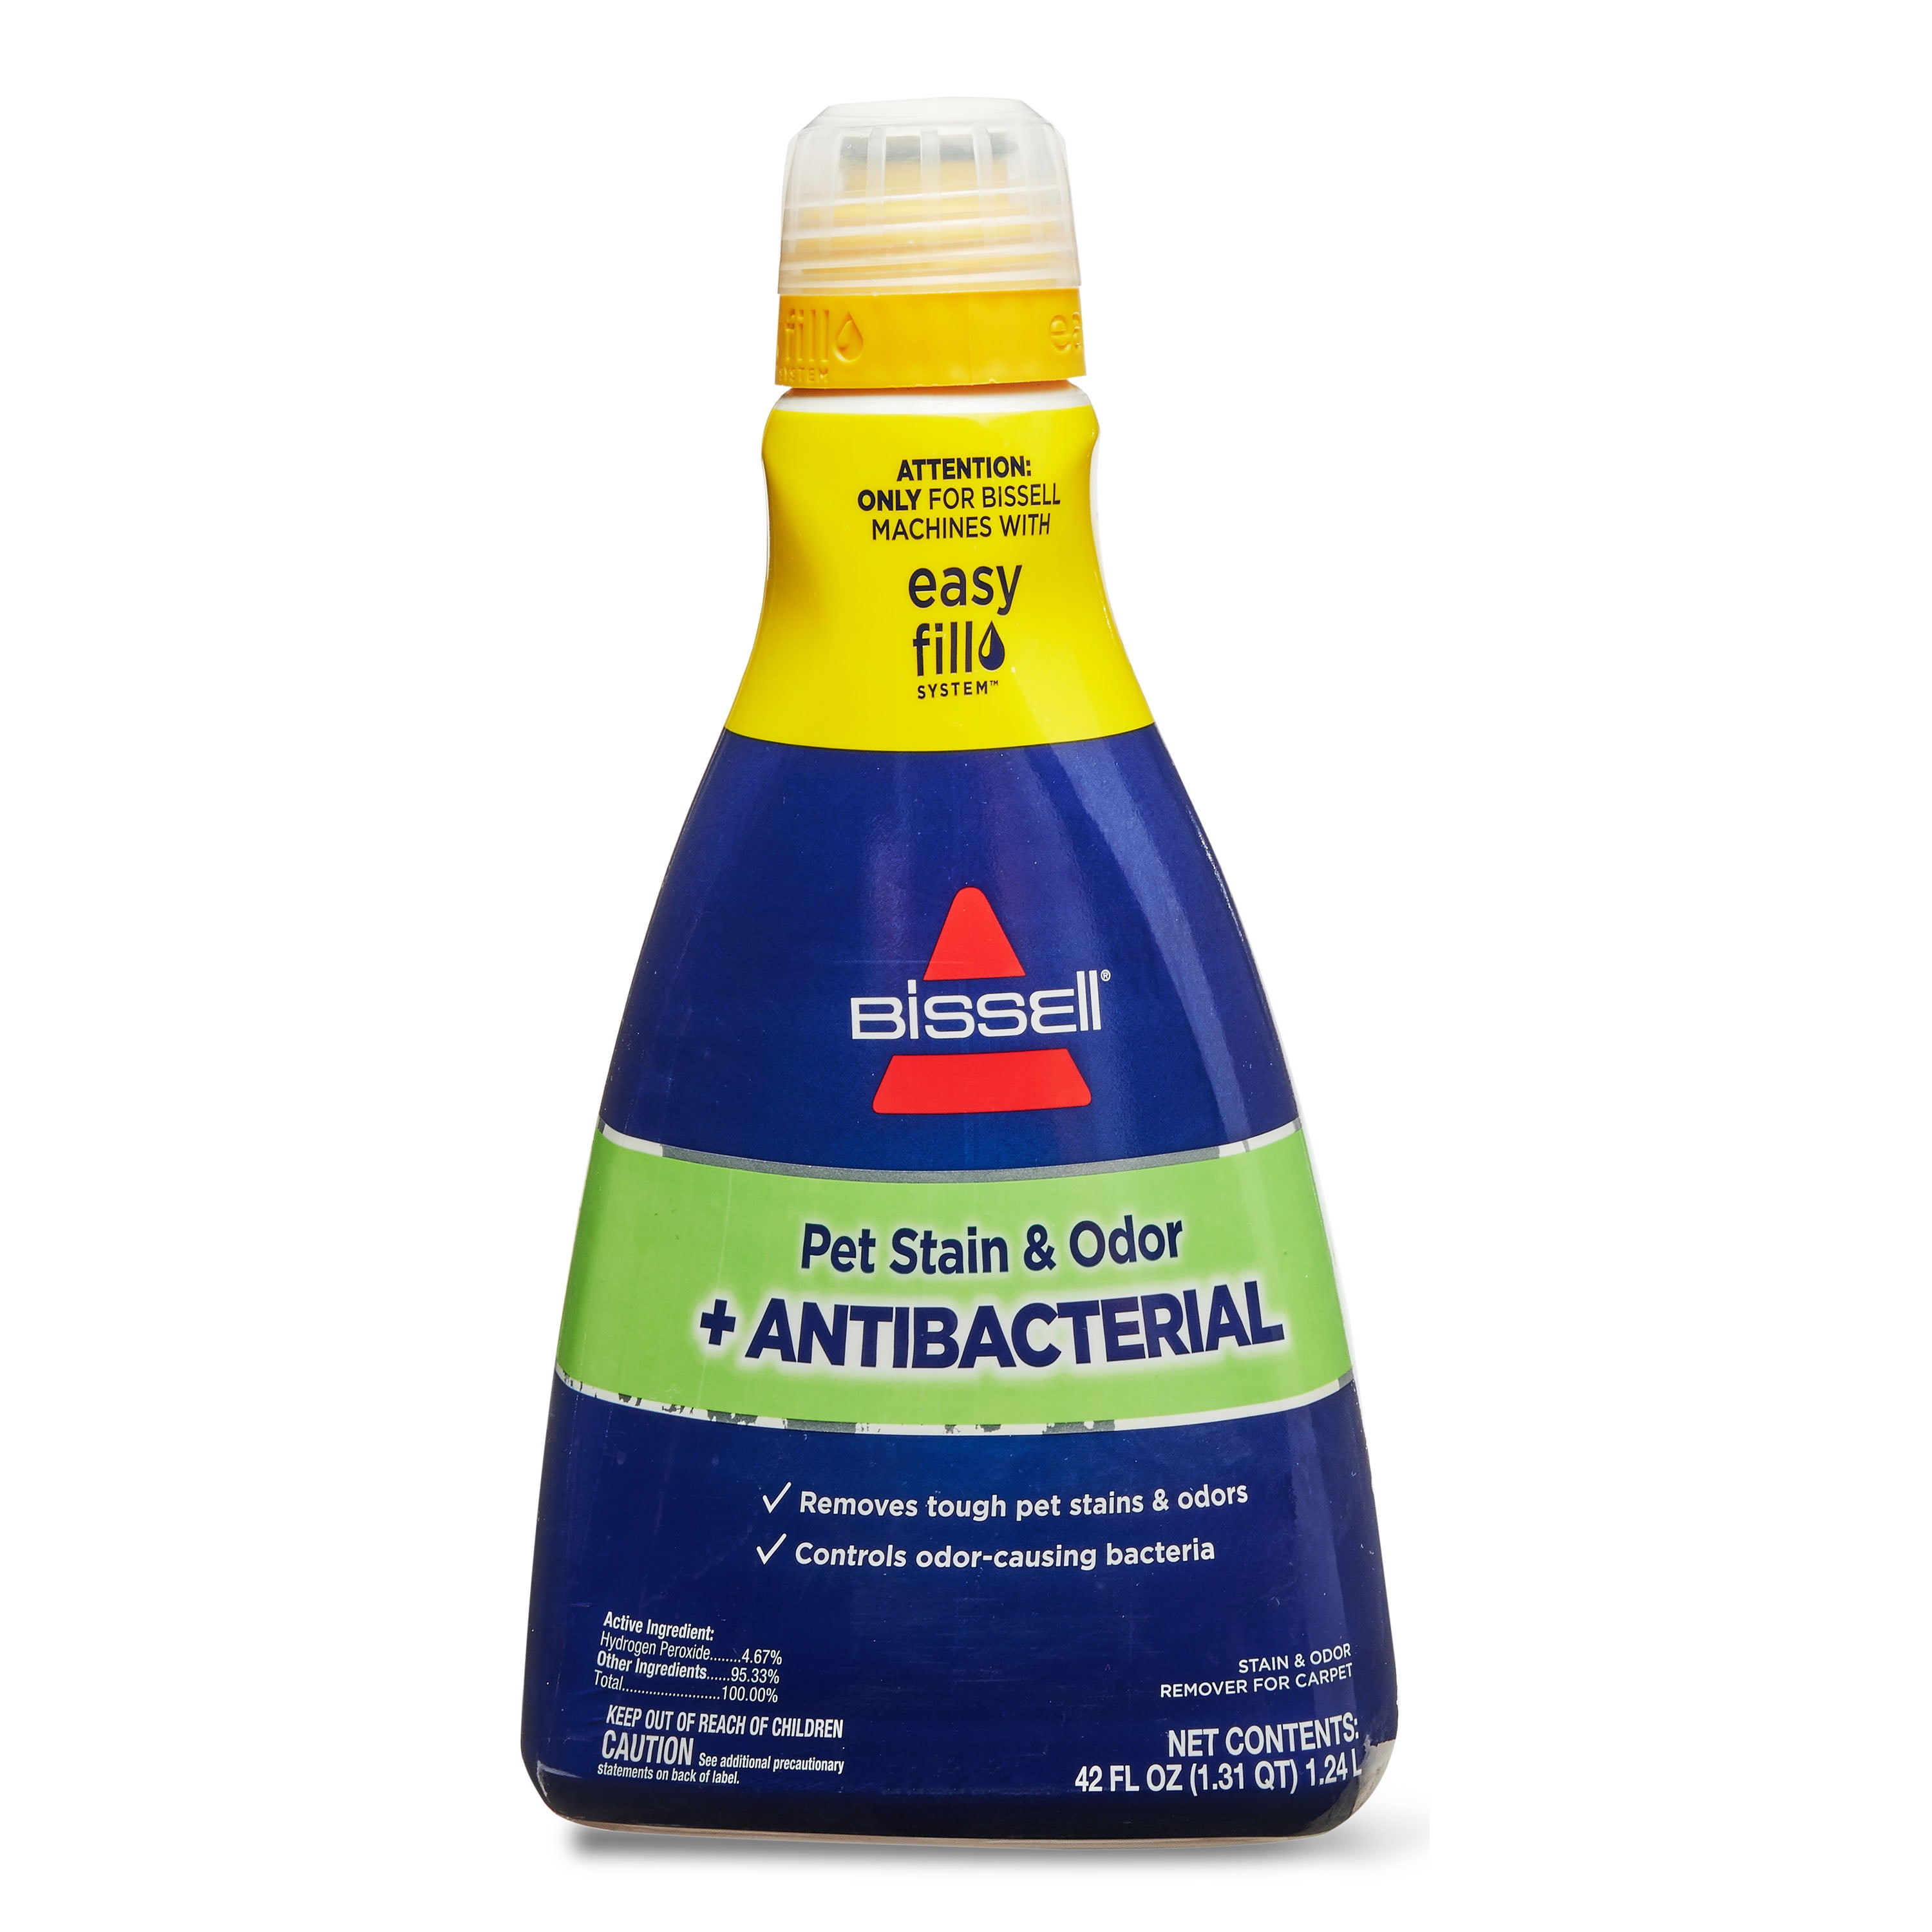 BISSELL Pet Stain & Odor + Antibacterial Carpet Cleaning Formula, 42 oz, 1567W